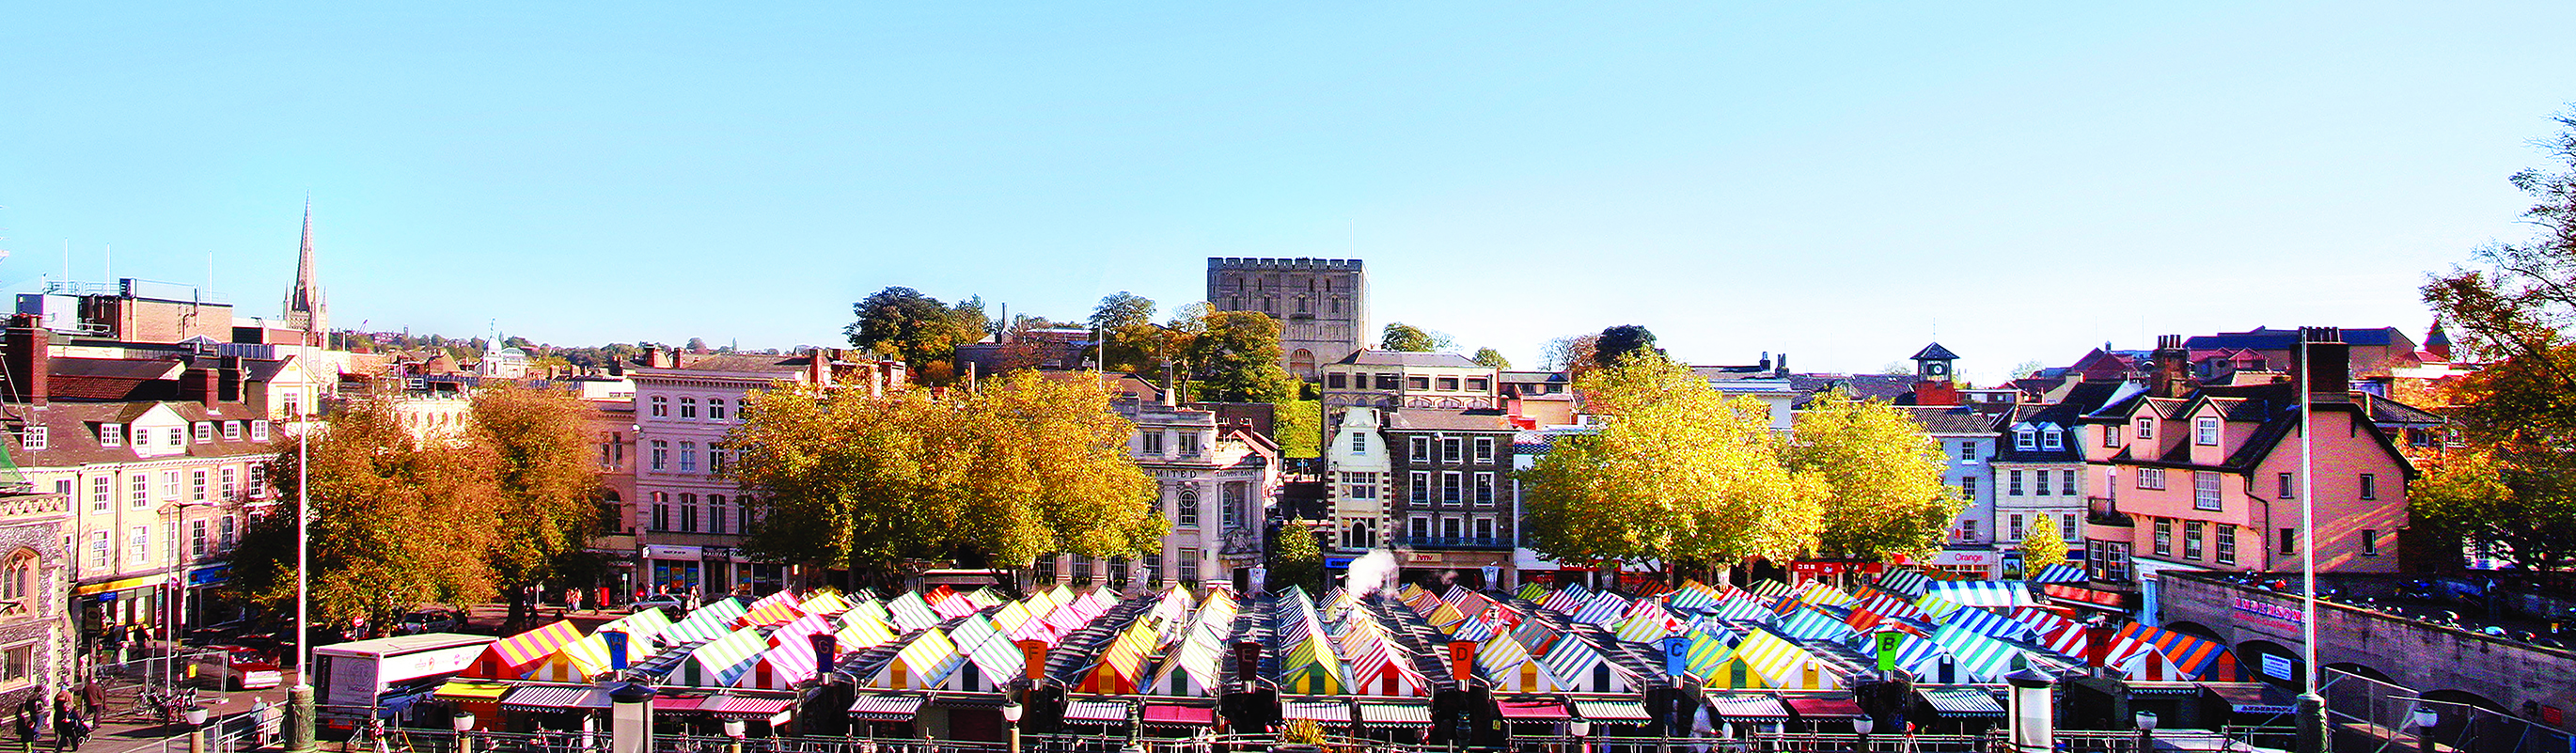 View from City Hall across the market towards Norwich Castle